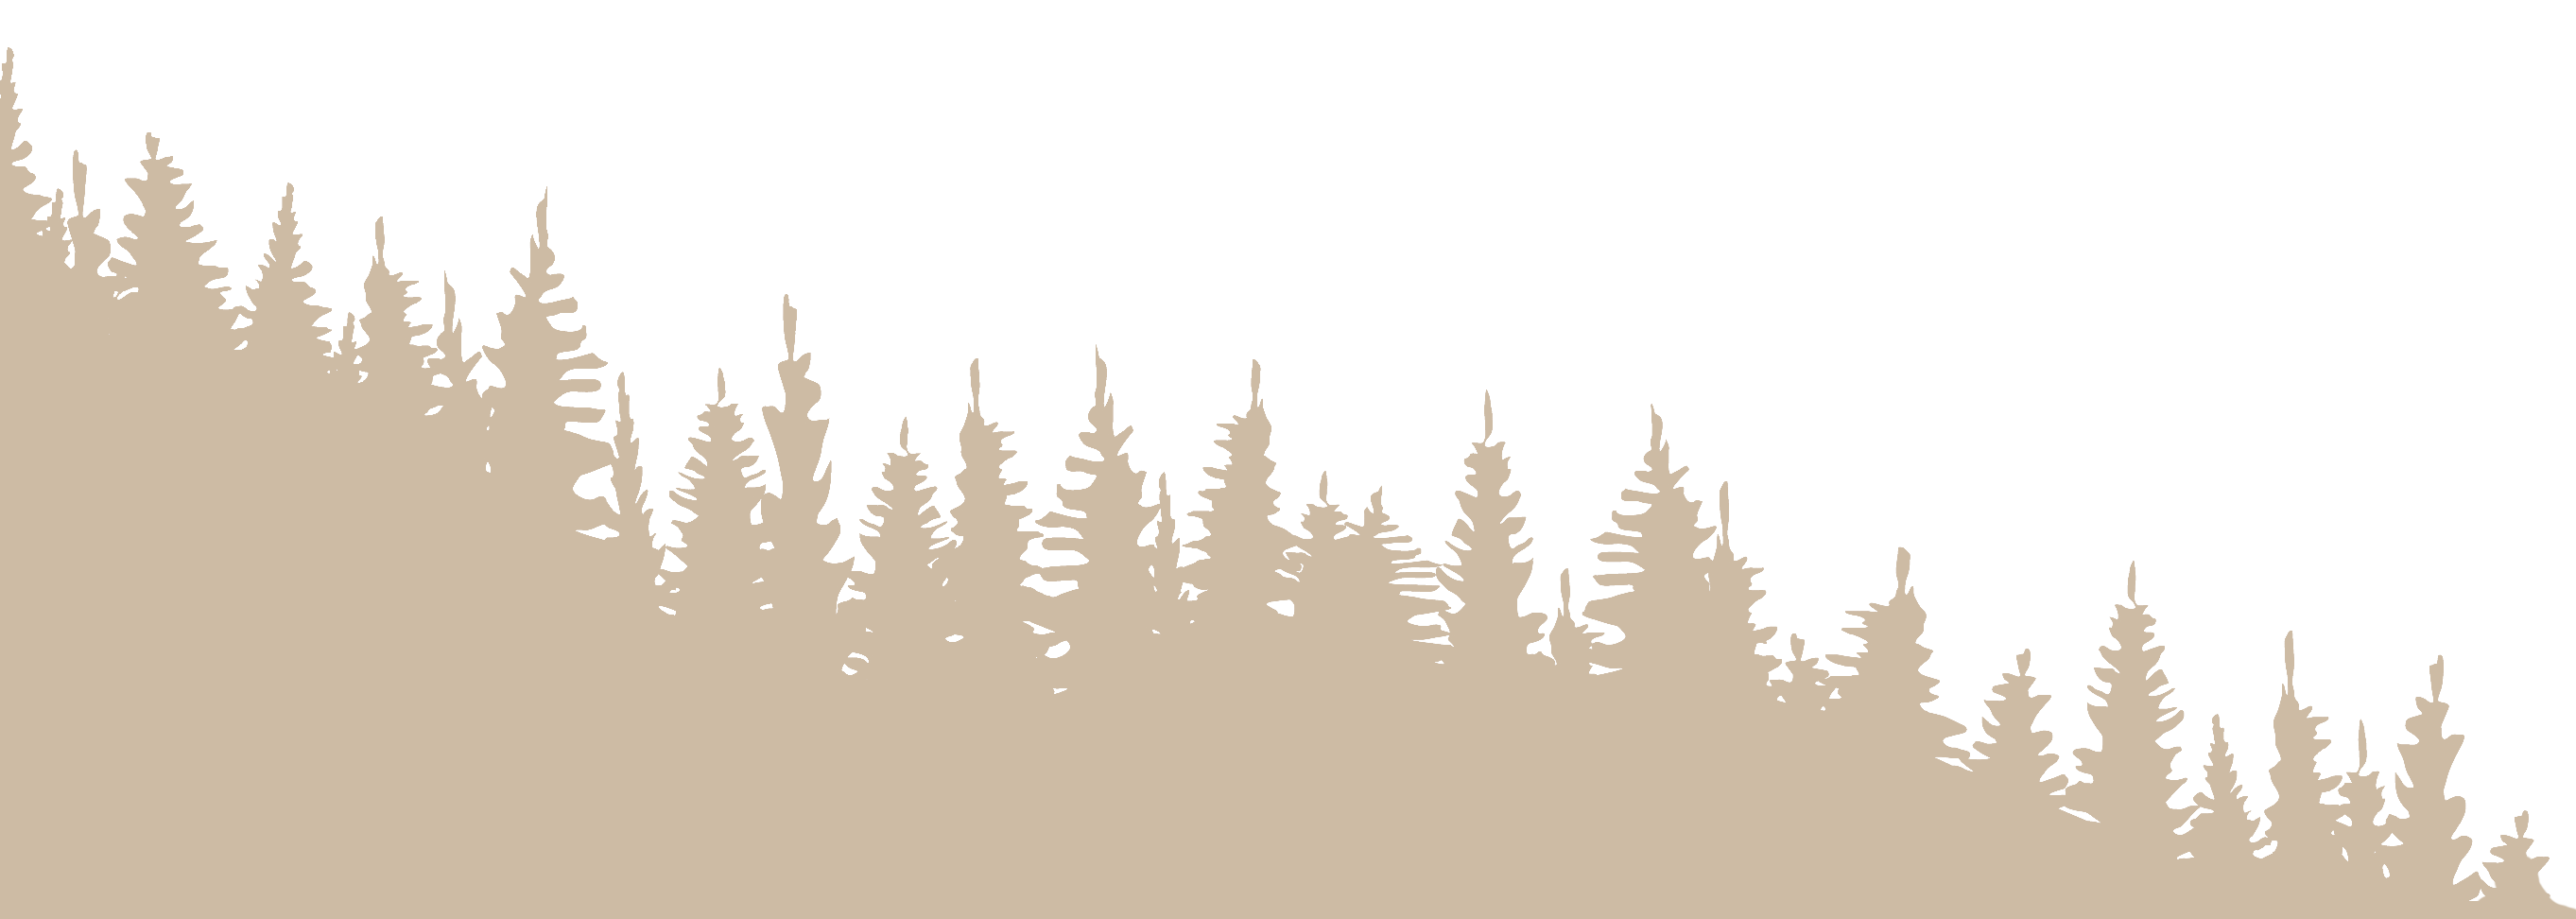 backdrop pine forests crop